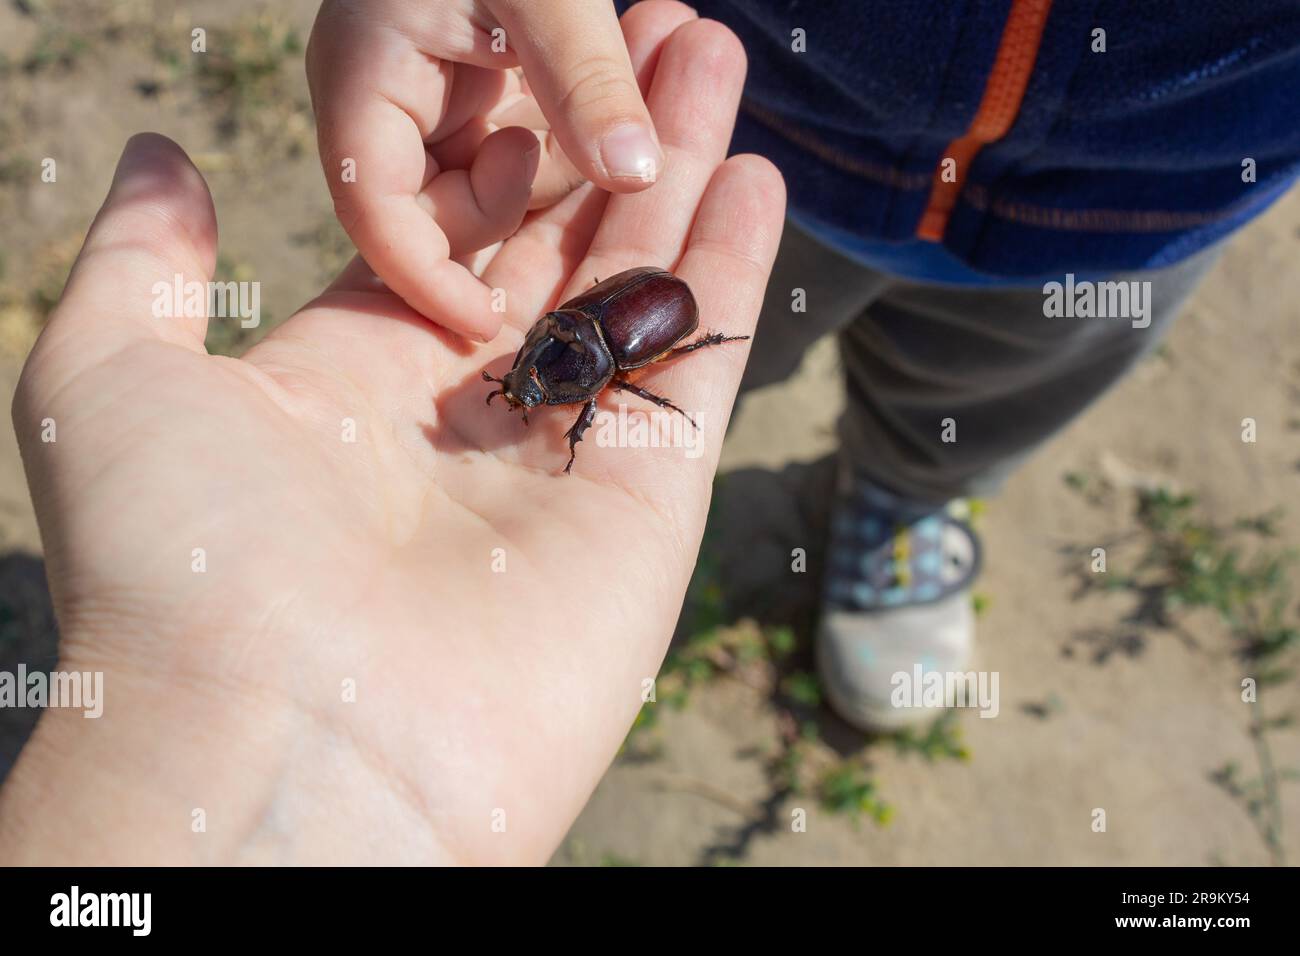 Interaction between an adult and a child in the study of the environment. Parent and child examine the beetle. Stock Photo